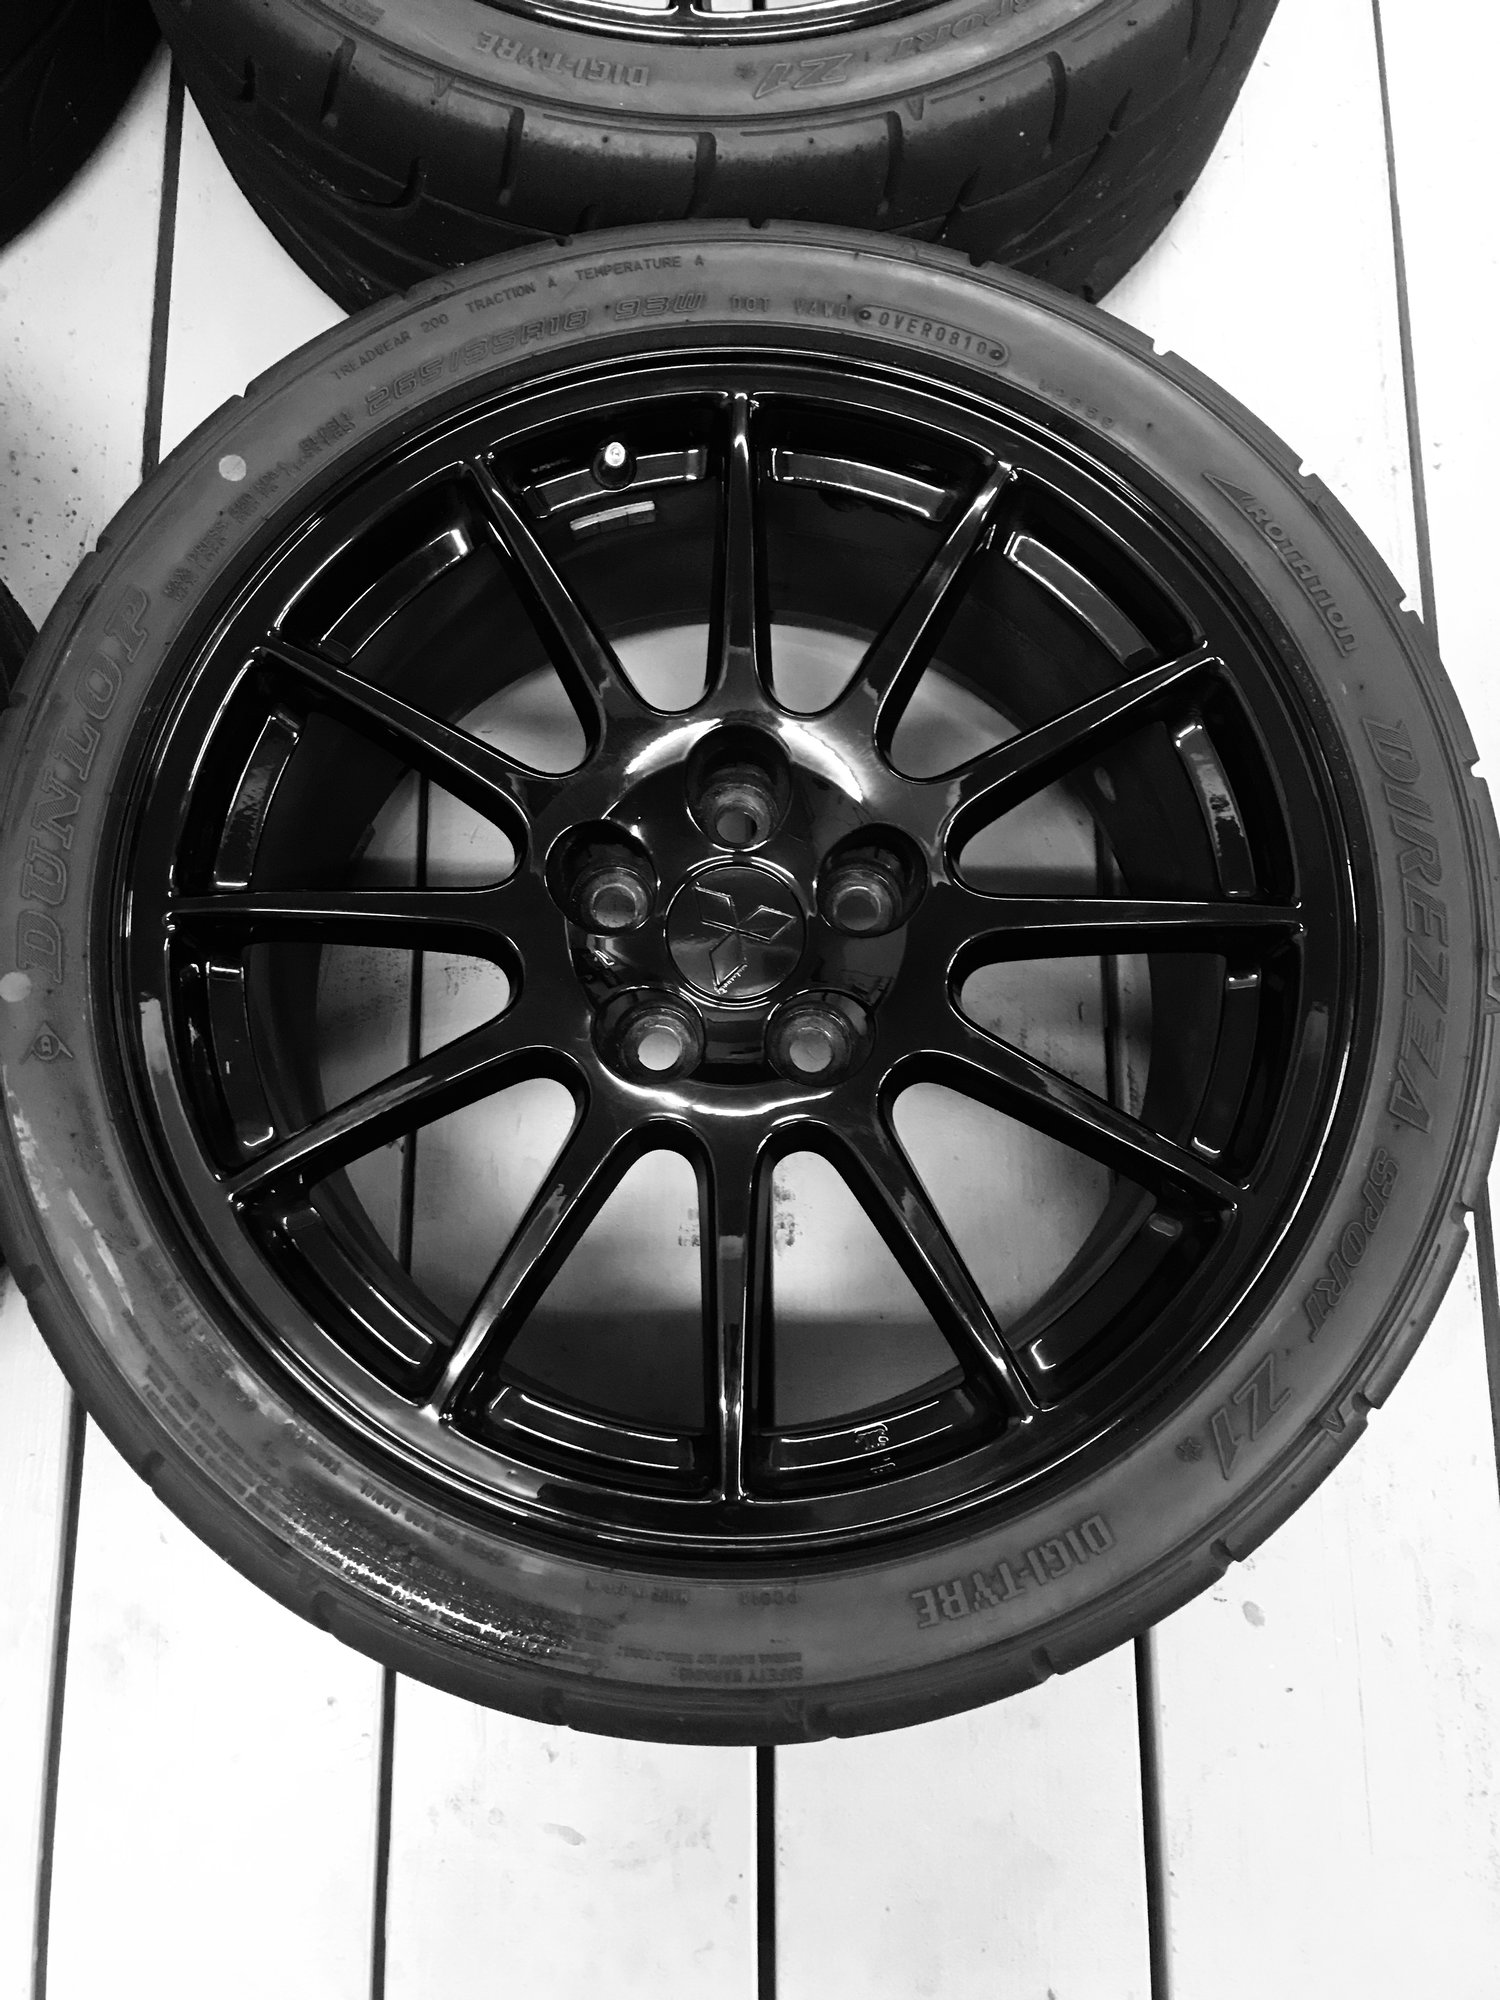 Wheels and Tires/Axles - EVO 10 GSR Wheels powder coated gloss black. With Dunlop 265/35-18 - Used - Omaha, NE 68117, United States